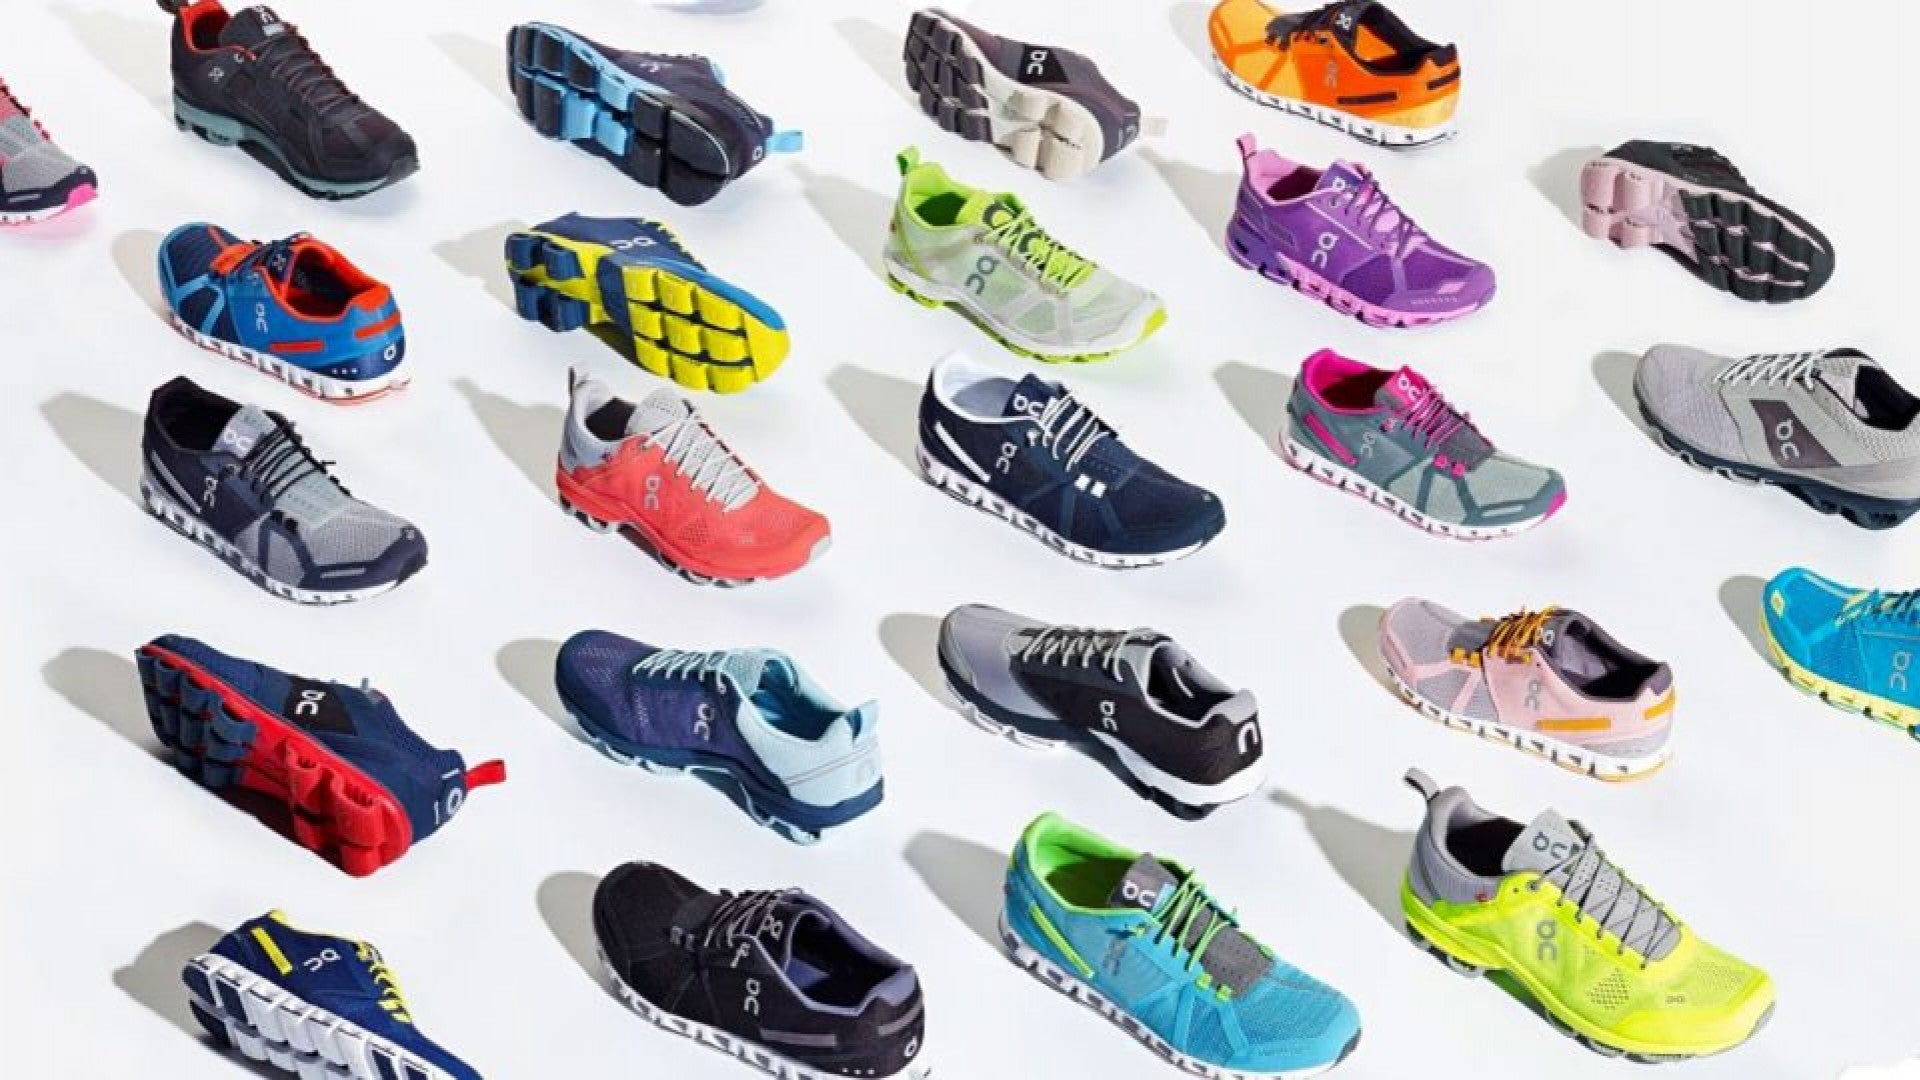 Will These Pace-Tuned Kicks Change How We Buy Running Shoes?